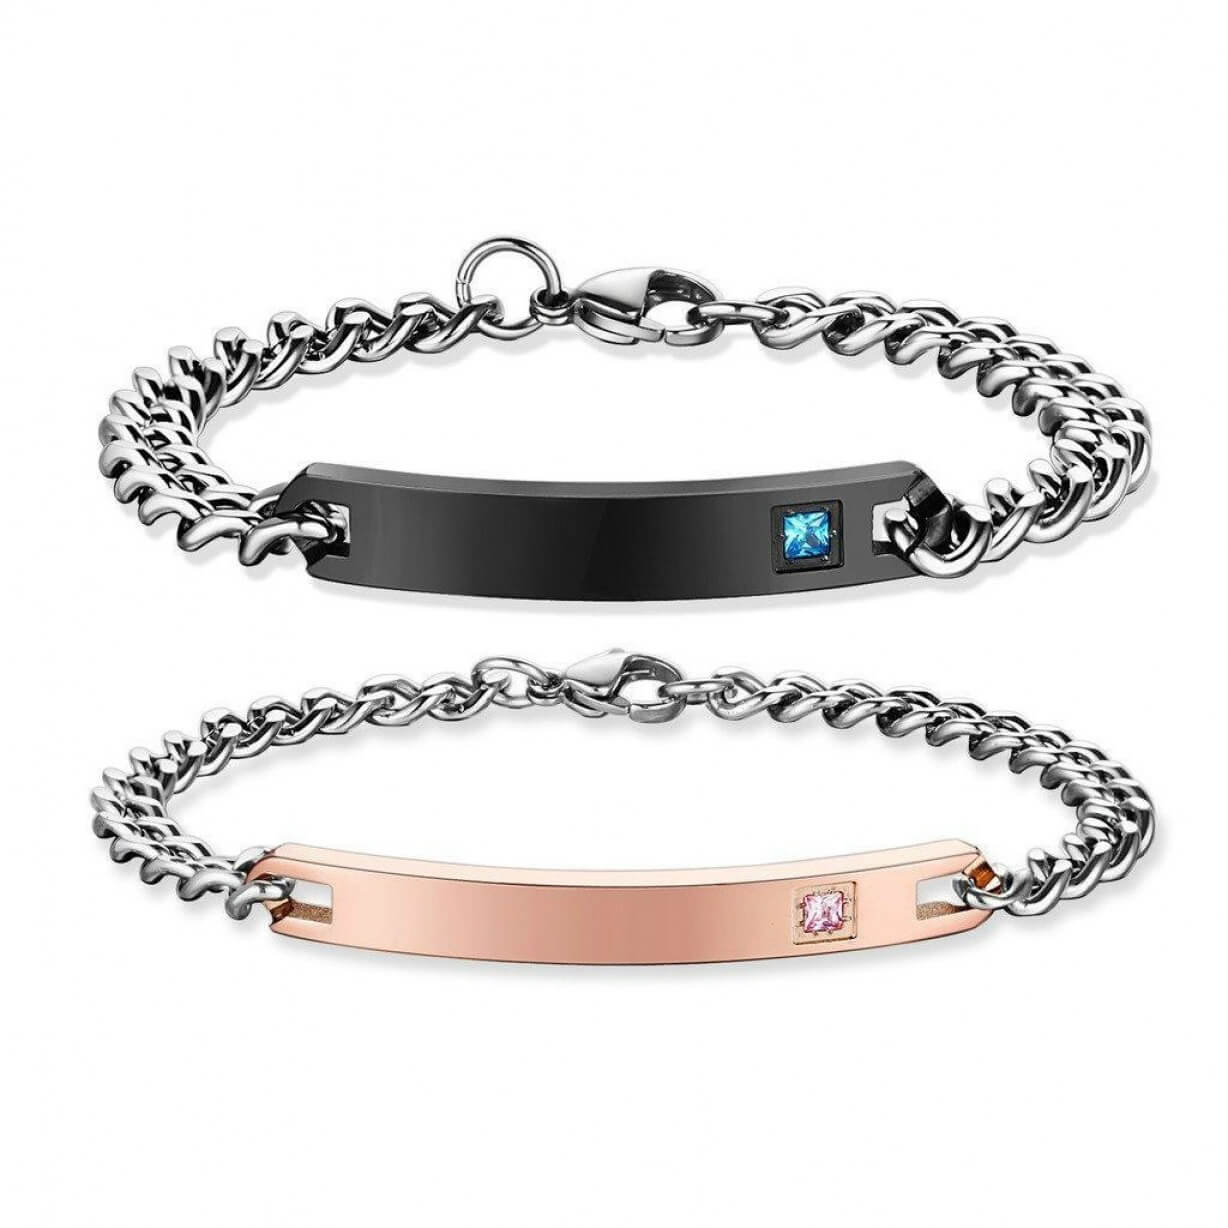 Magnetic Couples Bracelets - Engraved & Shipped From Australia - Auswara